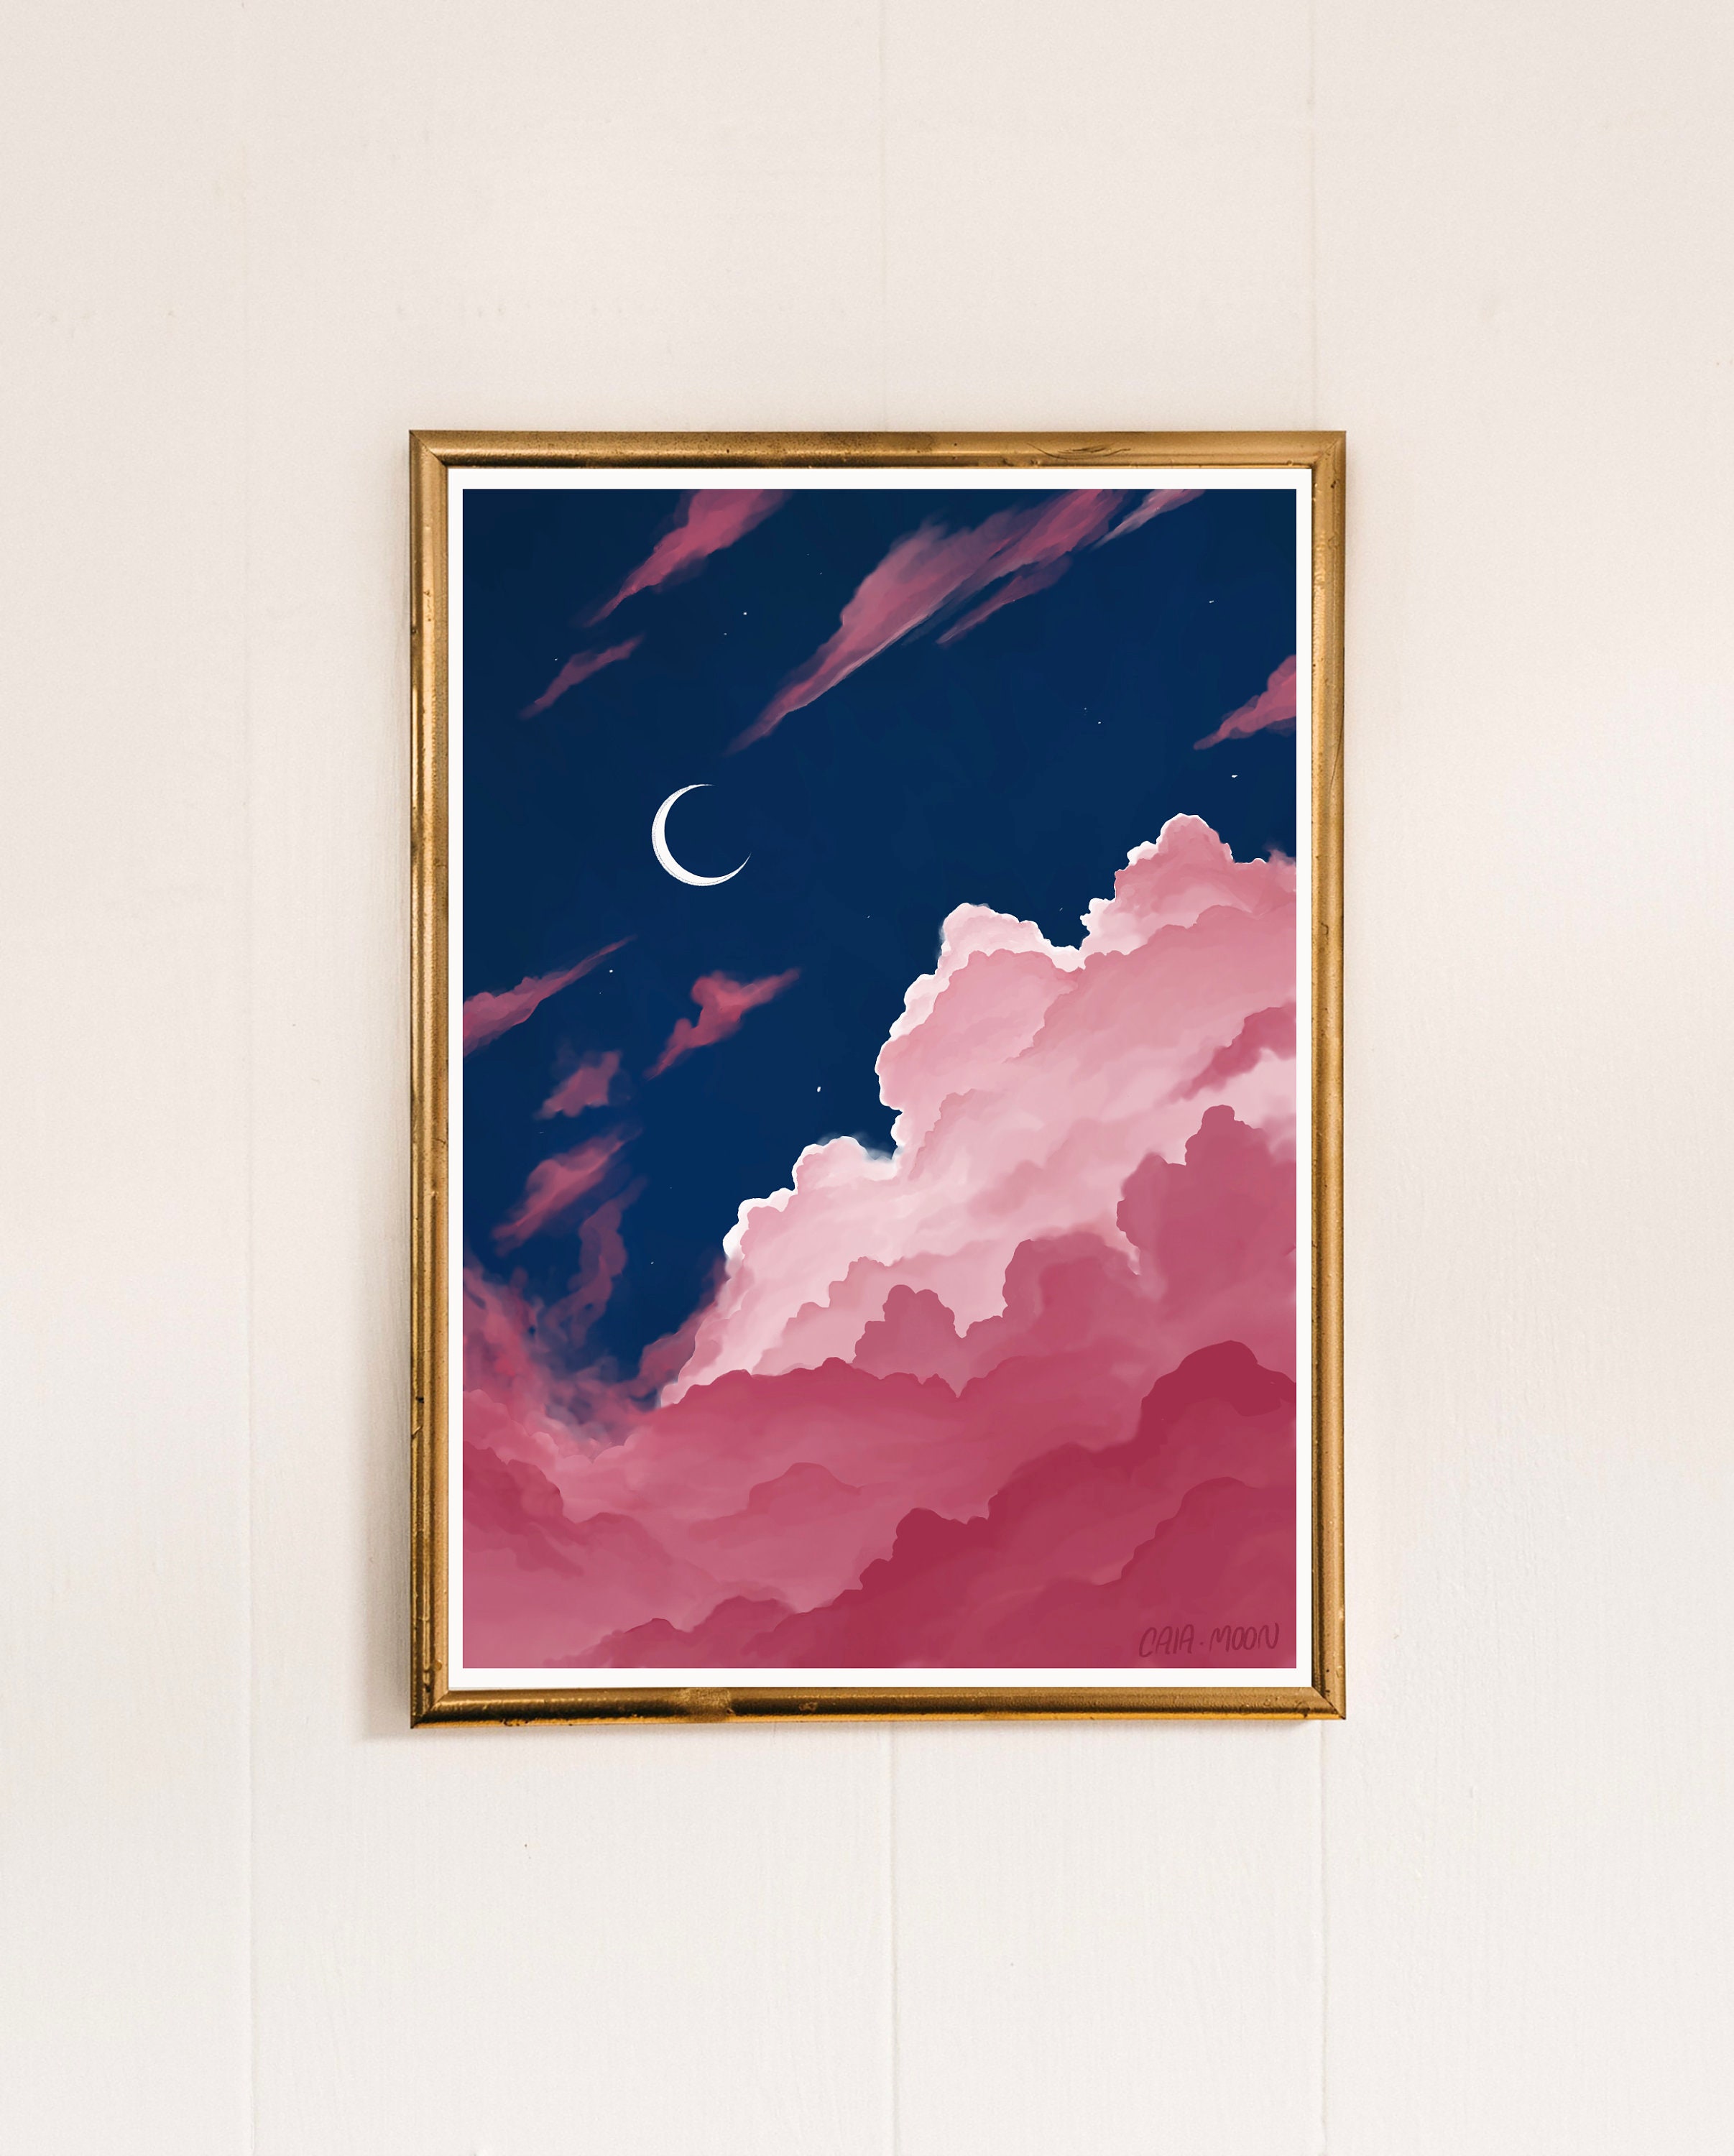 Pink Sunset Art Print, Acrylic Painting, Abstract Print, Landscape